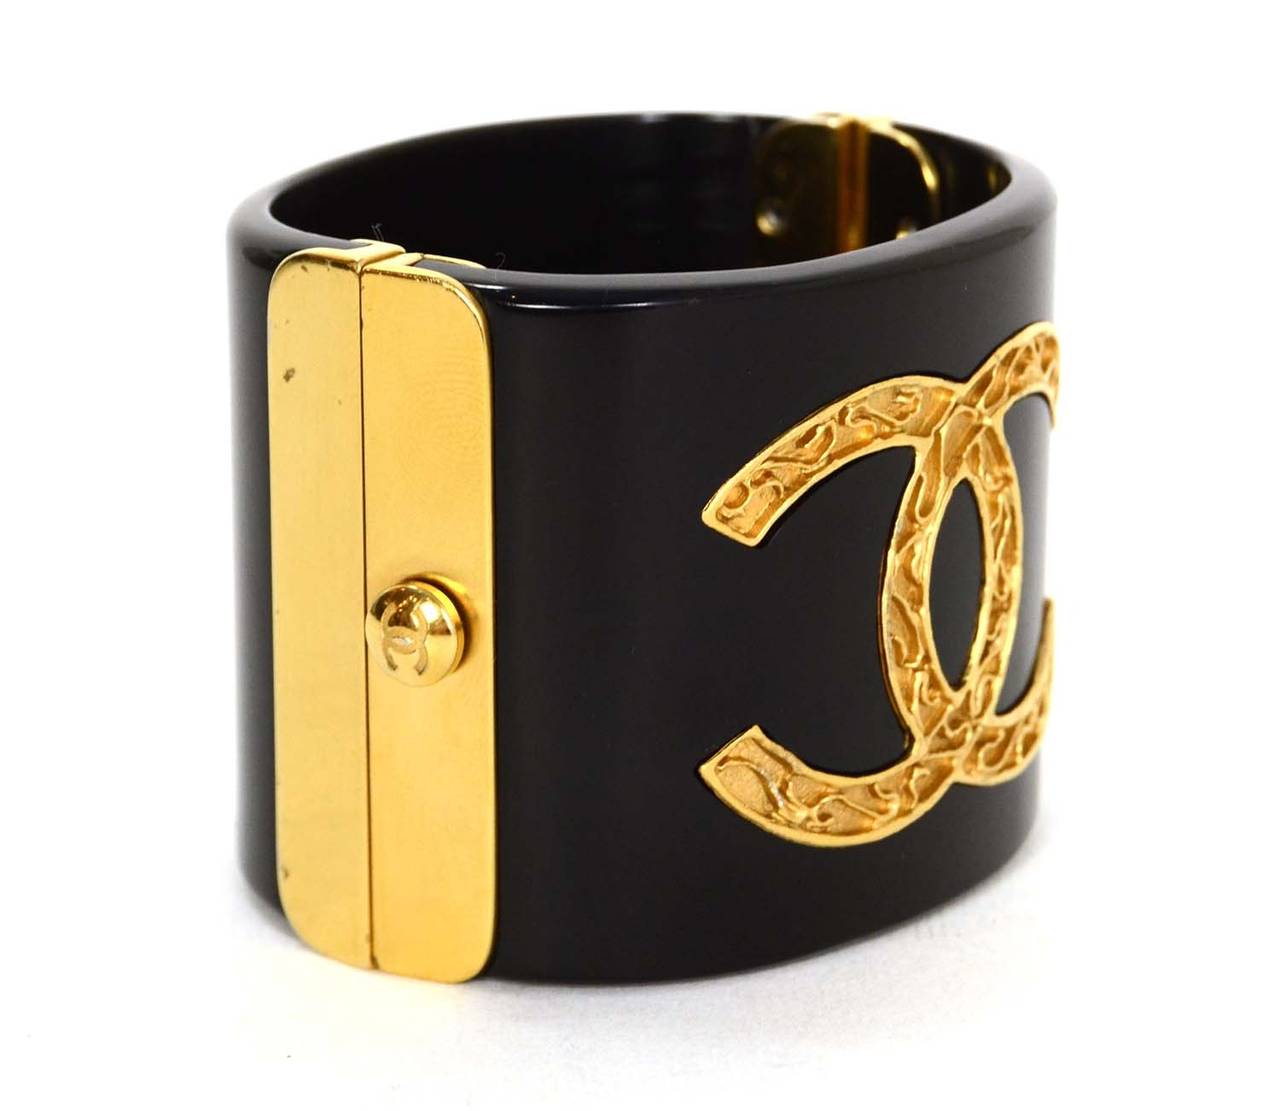 Chanel Black Resin & Goldtone Cuff
Features large goldtone CC on front
Made in: Italy
Year of Production: 2011
Stamp: B11 CC A
Closure: Hinge style opening with small CC button for push lock closure
Color: Black and goldtone
Materials: Resin